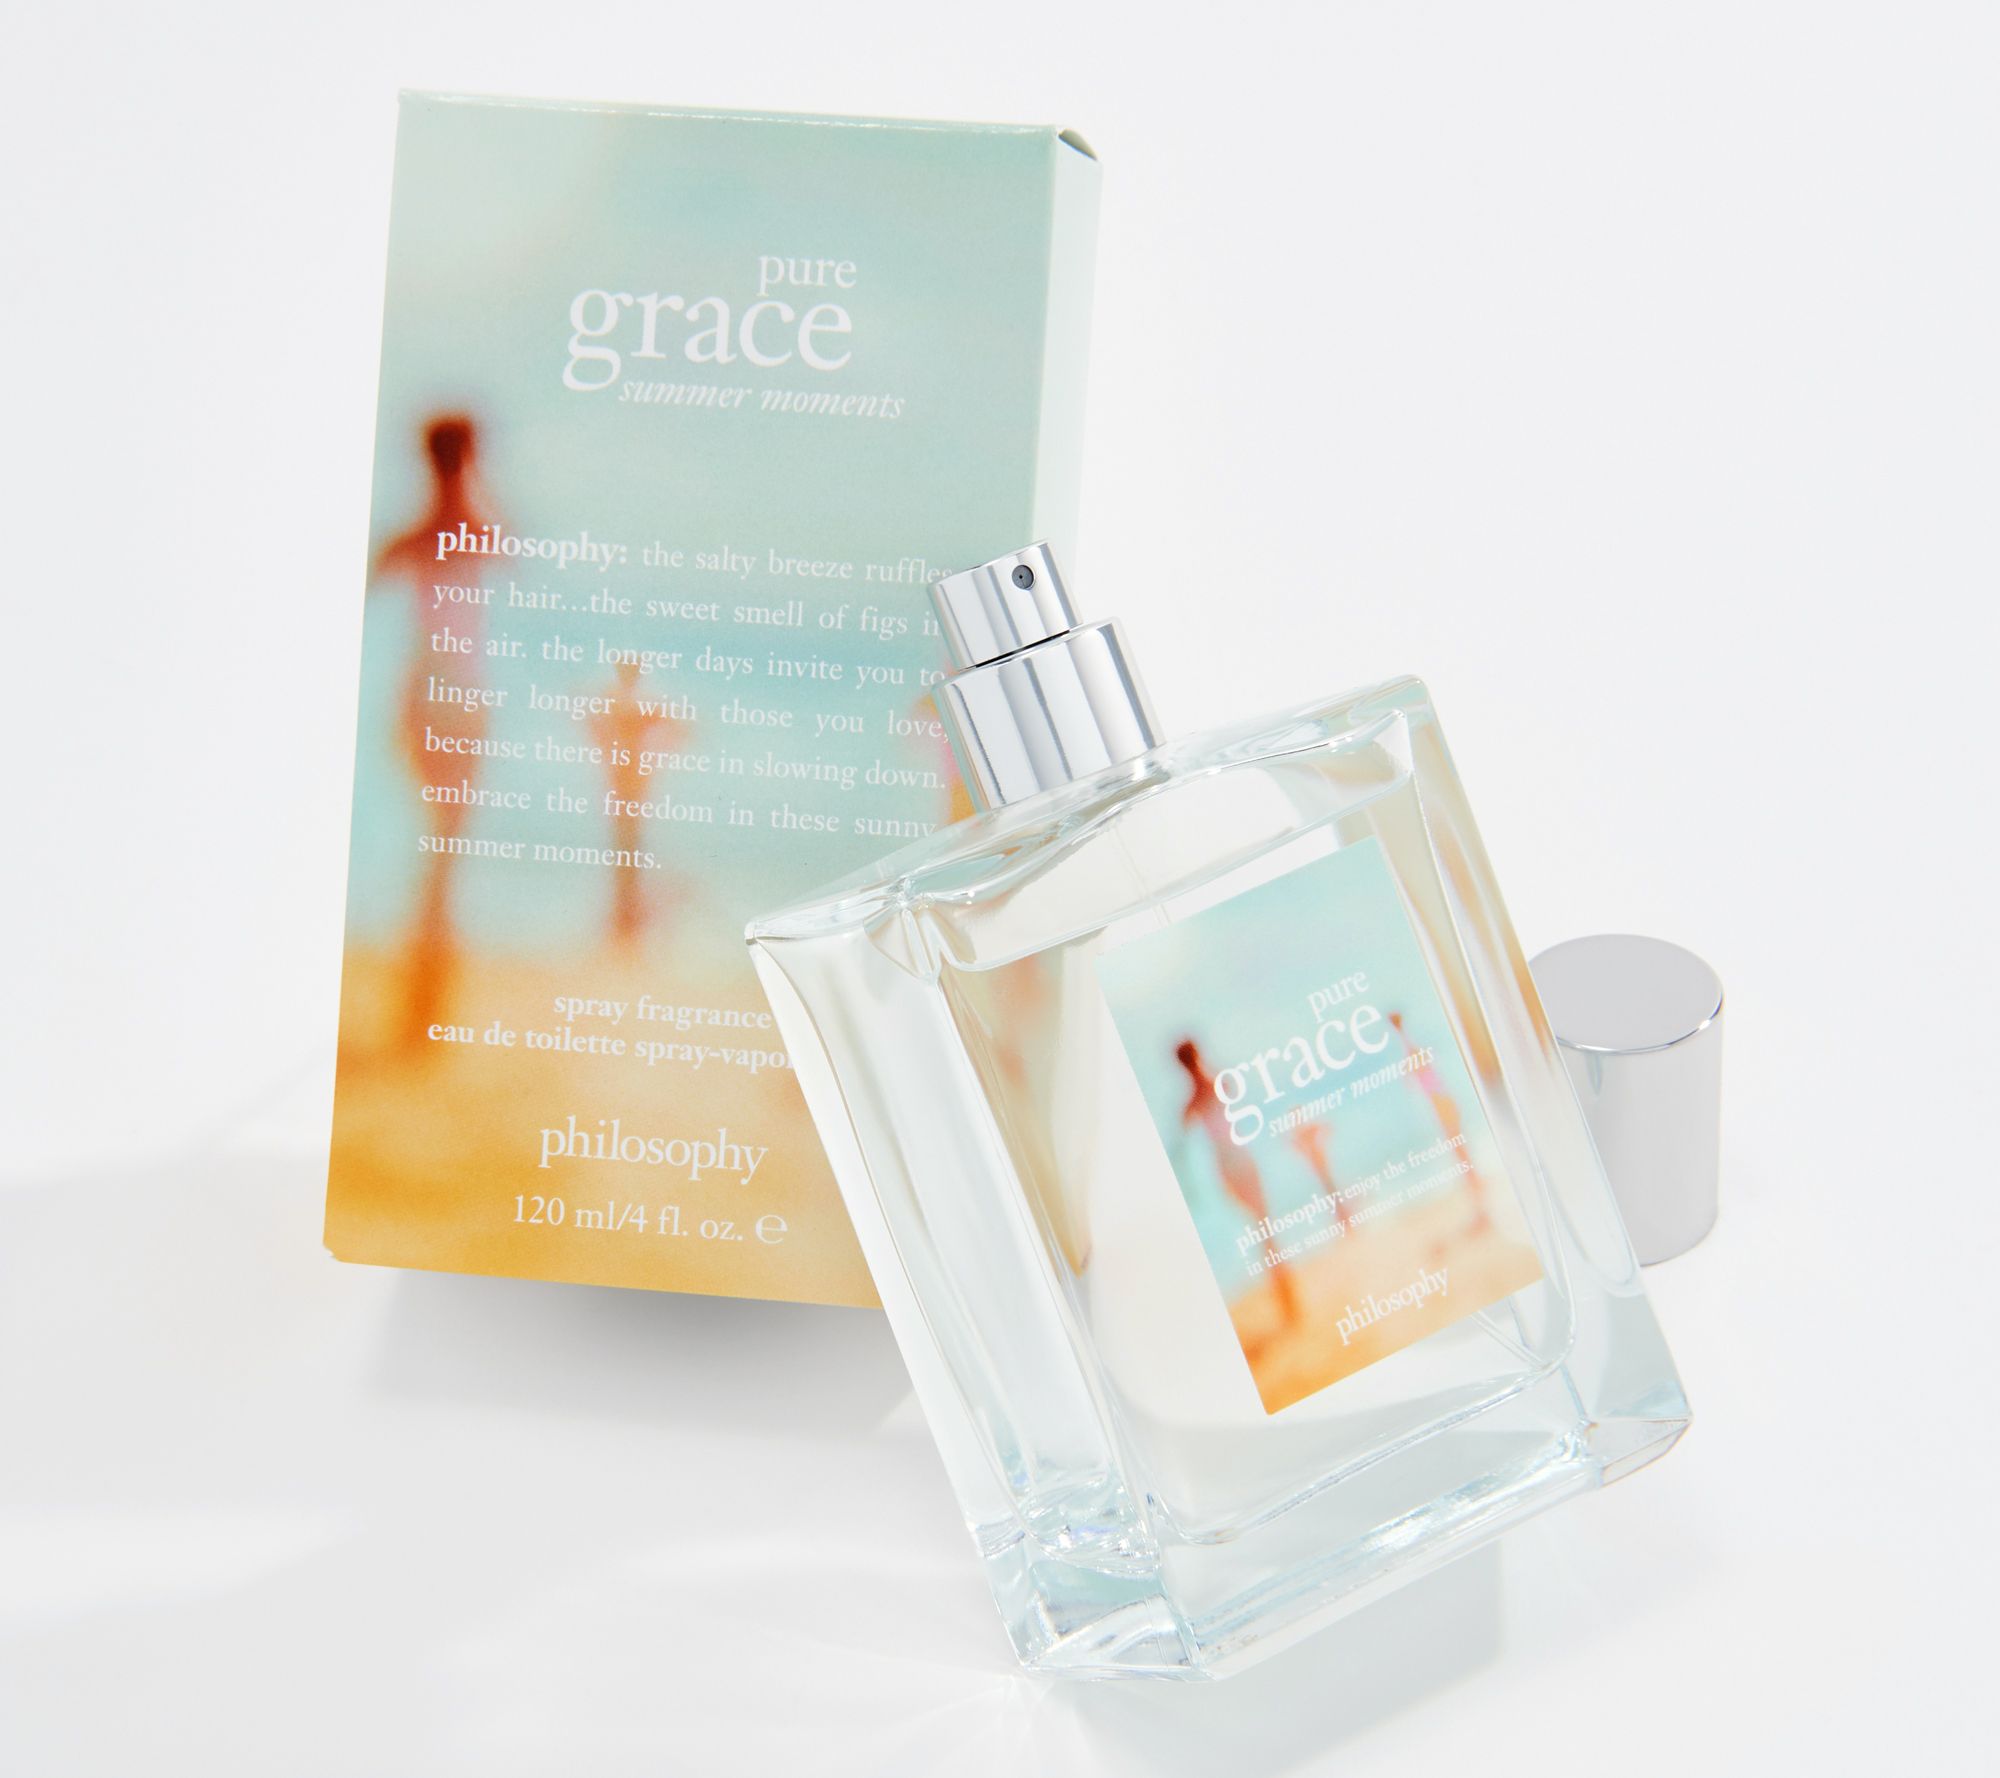 Loving this limited edition: philosophy pure grace endless summer